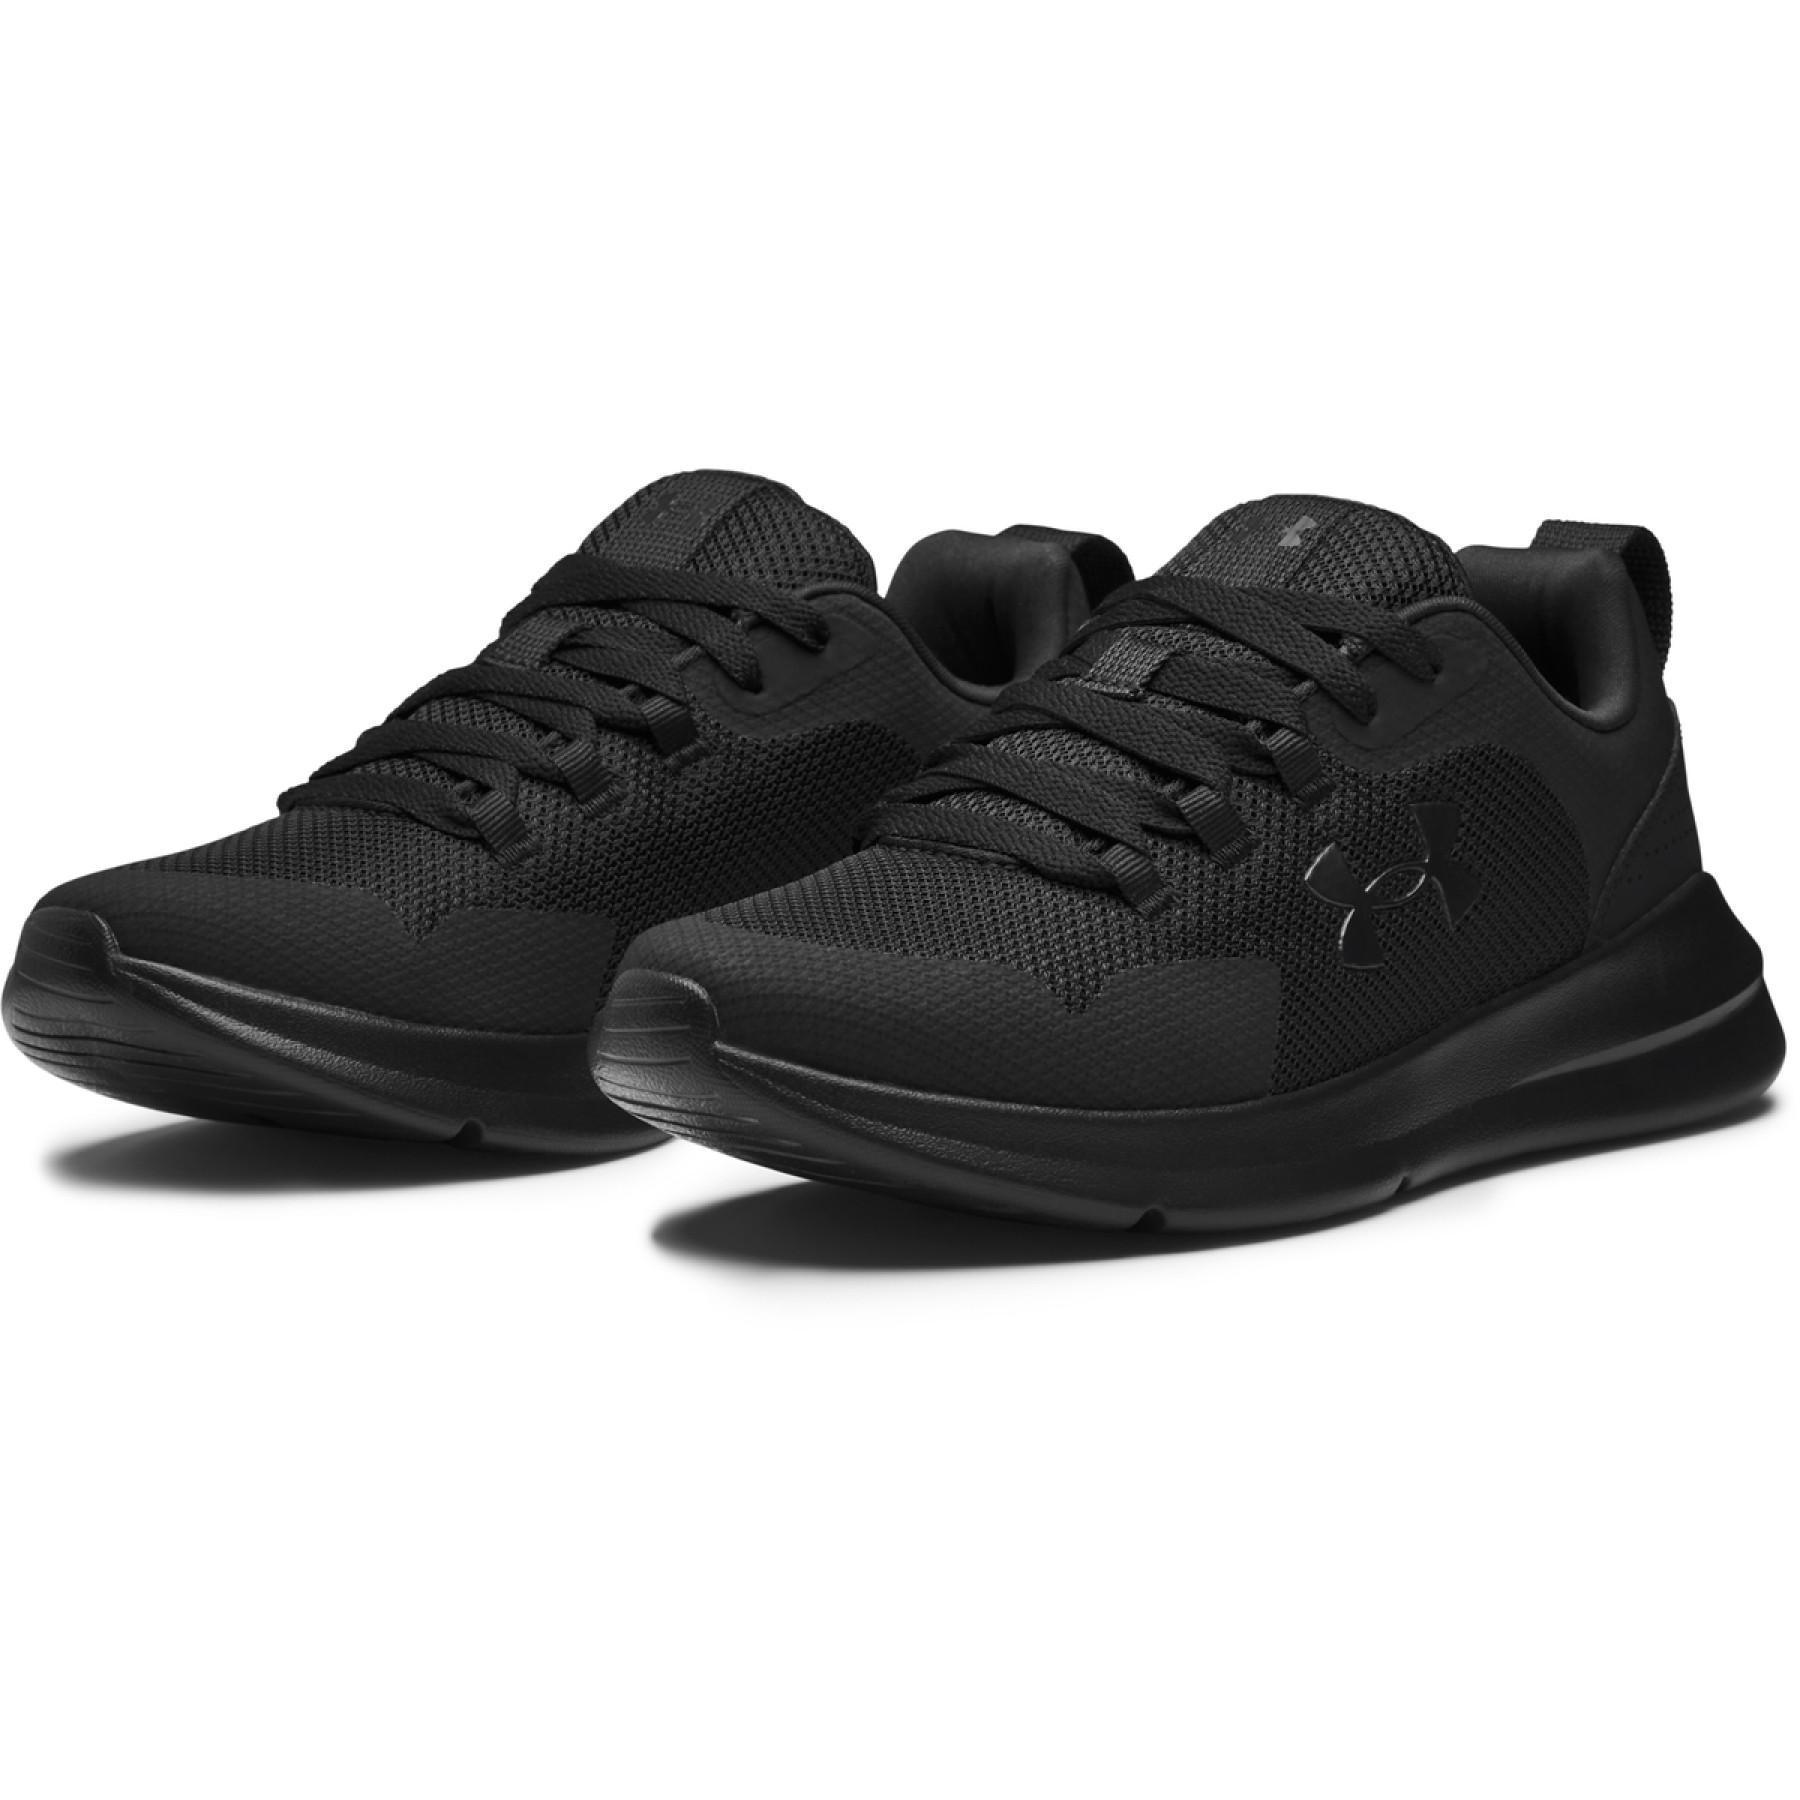 Women's shoes Under Armour Essential Sportstyle